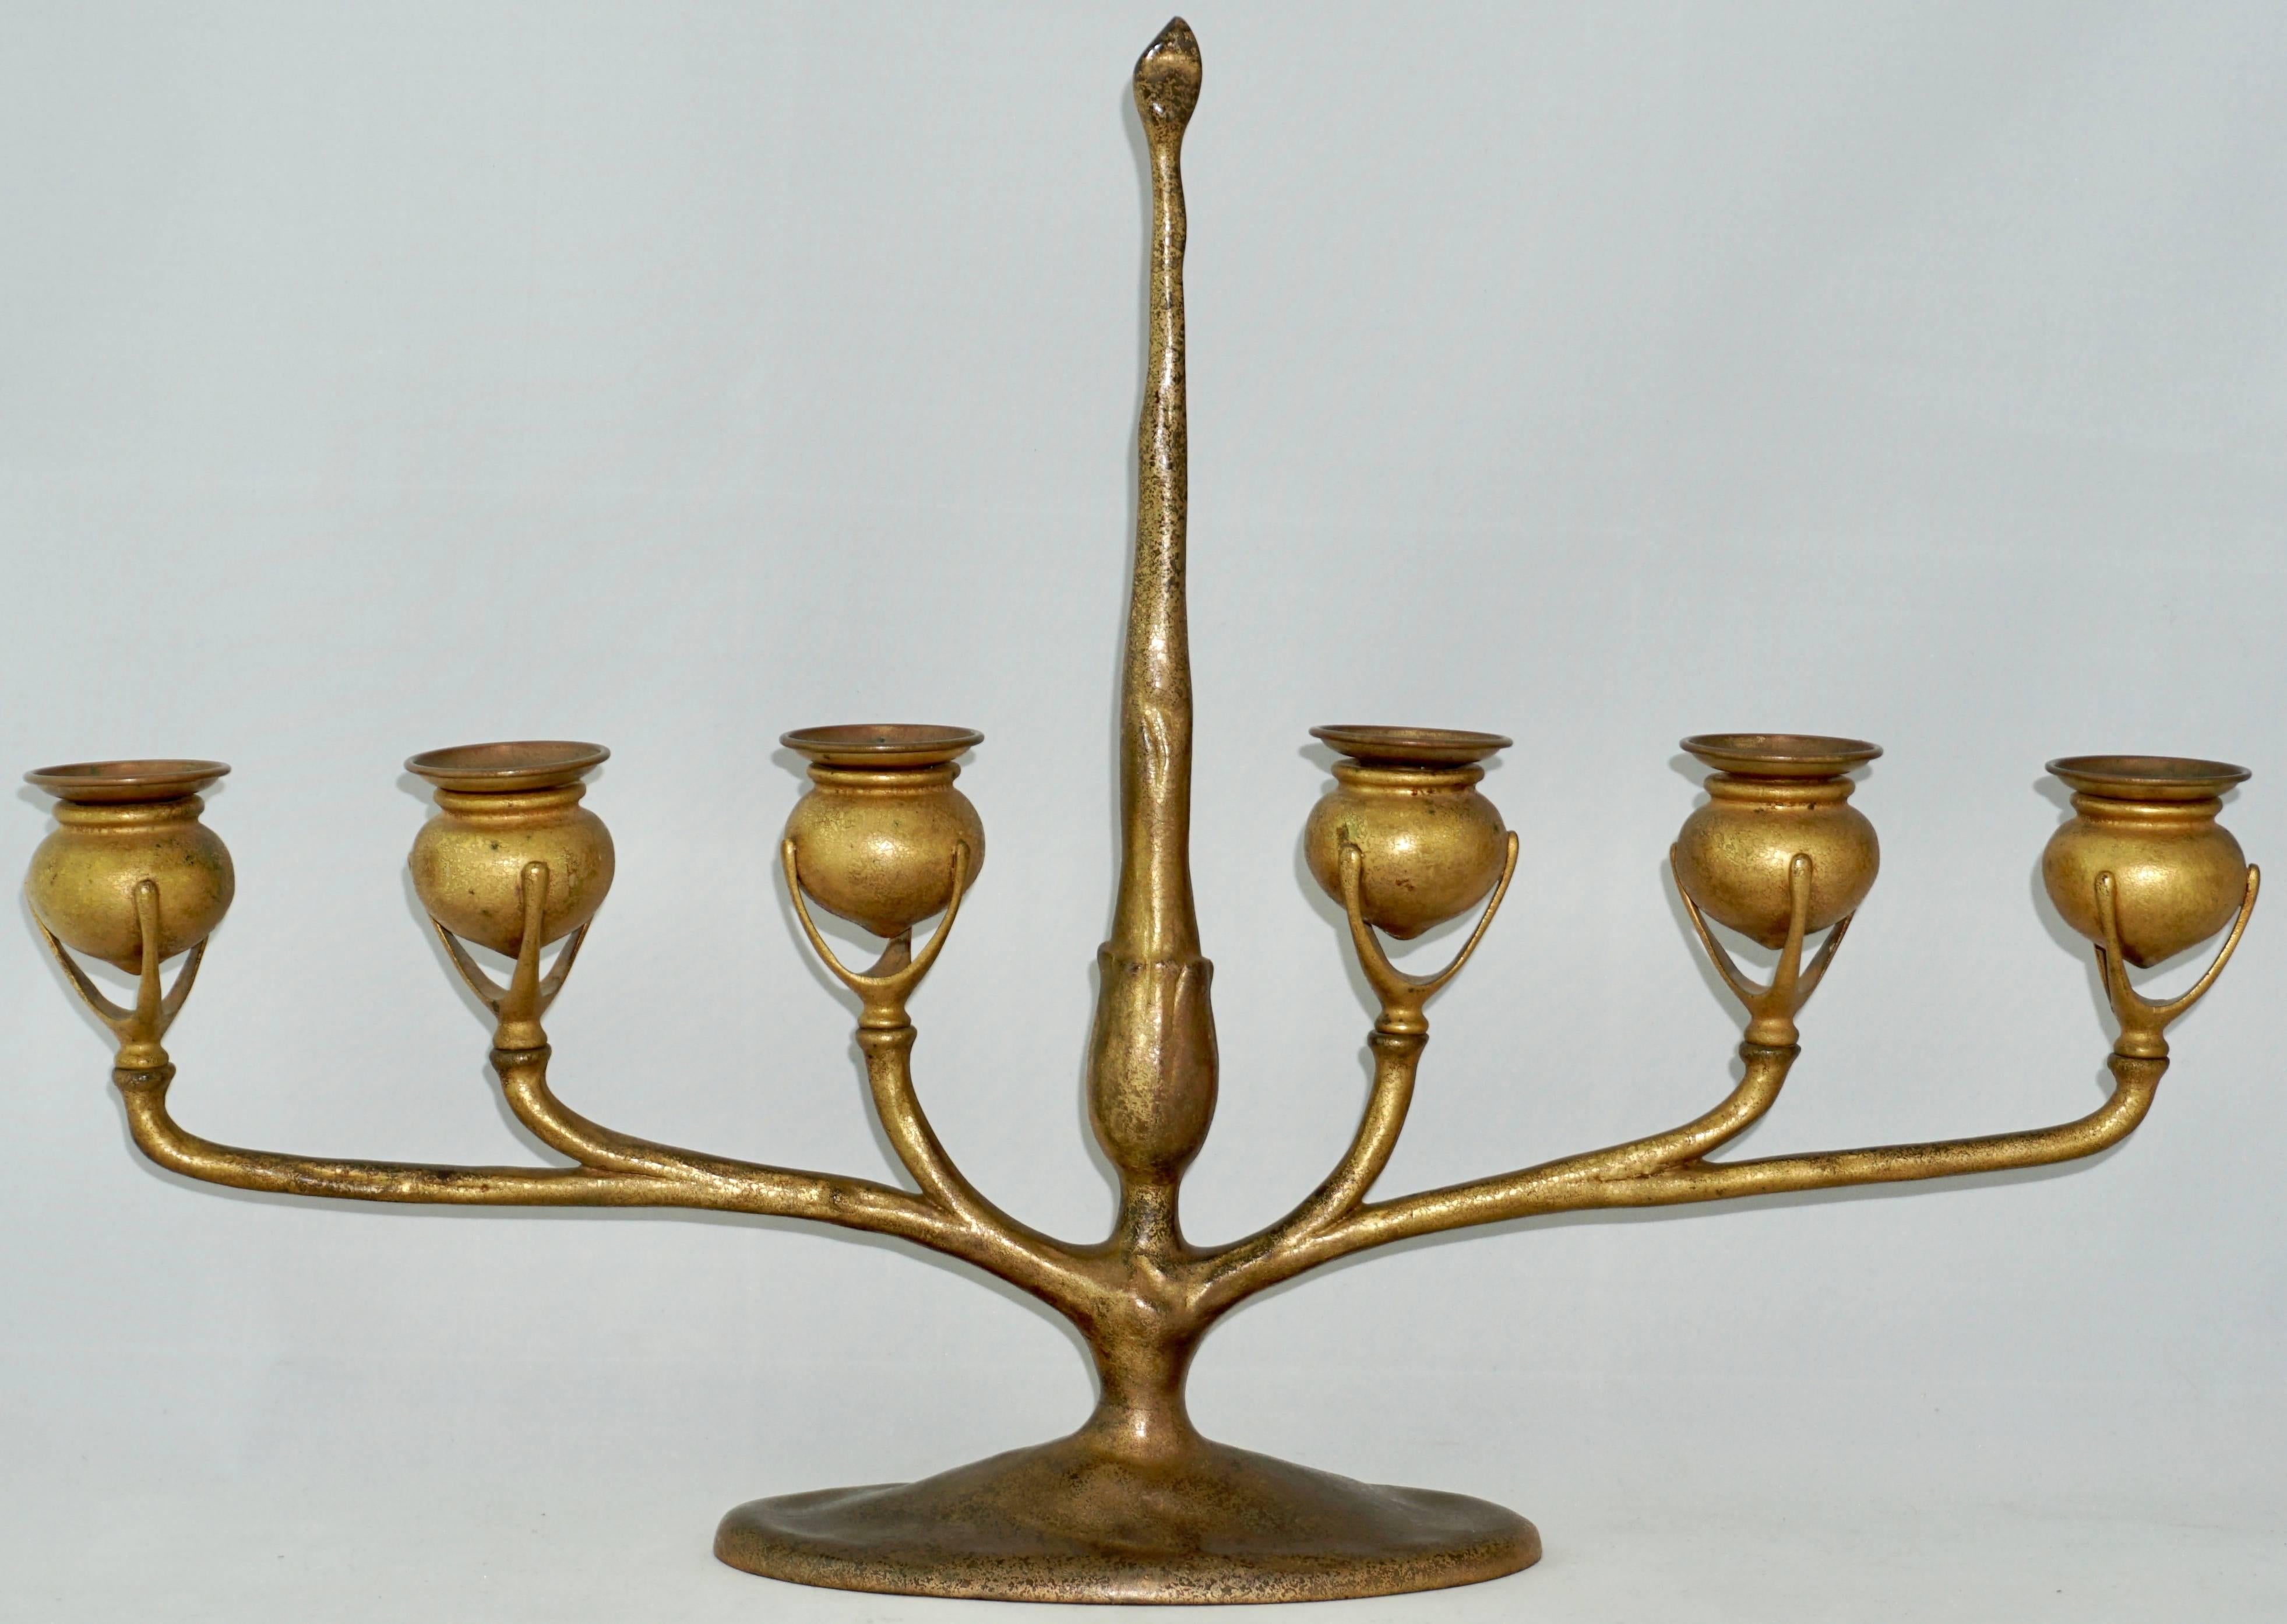 Beautiful Tiffany Studios candelabra, six light form in bronze with center post bearing a fitted candle snuff and extending arms supporting six pod form candle holders with removable bobeches. Original gold doré patina textured. Art Nouveau perfect